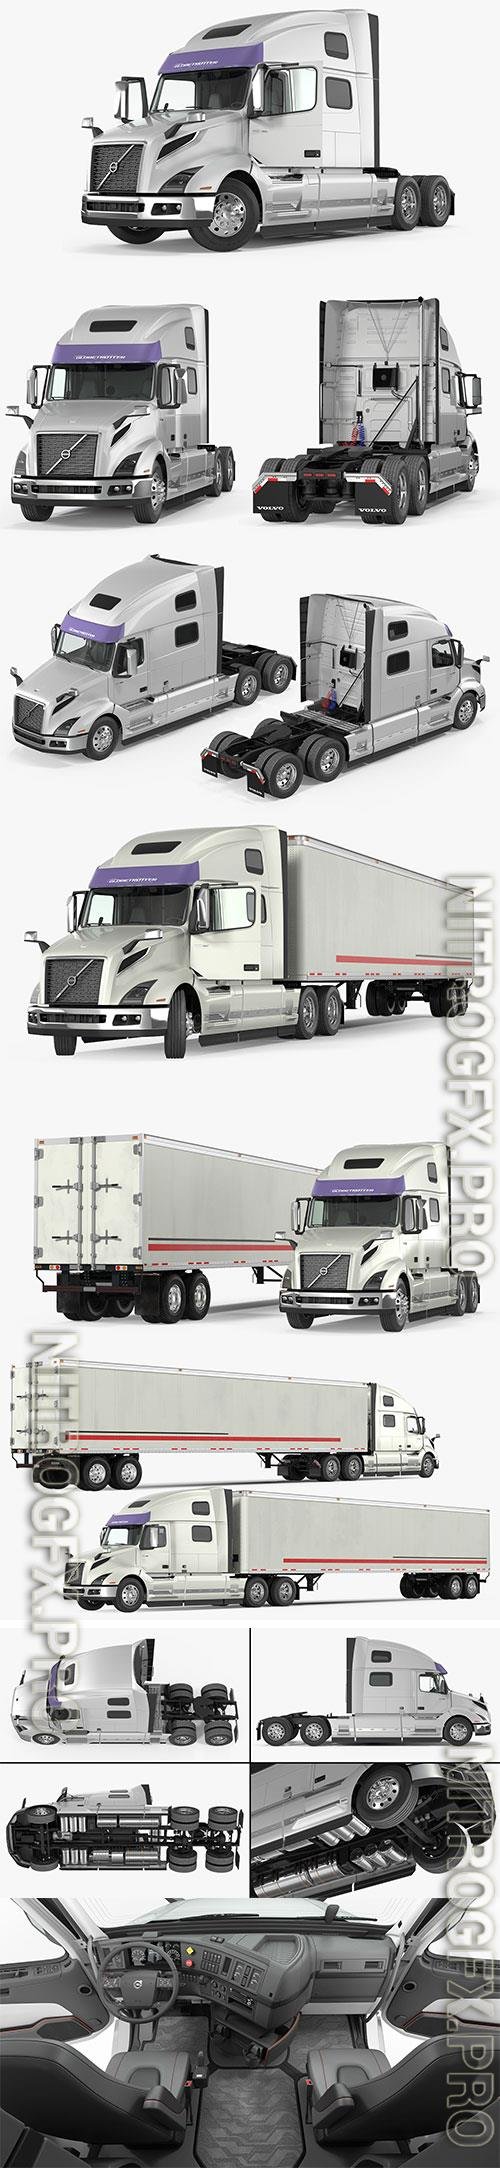 Volvo VNL 860 Truck 2018 with Trailer Rigged 3D Model